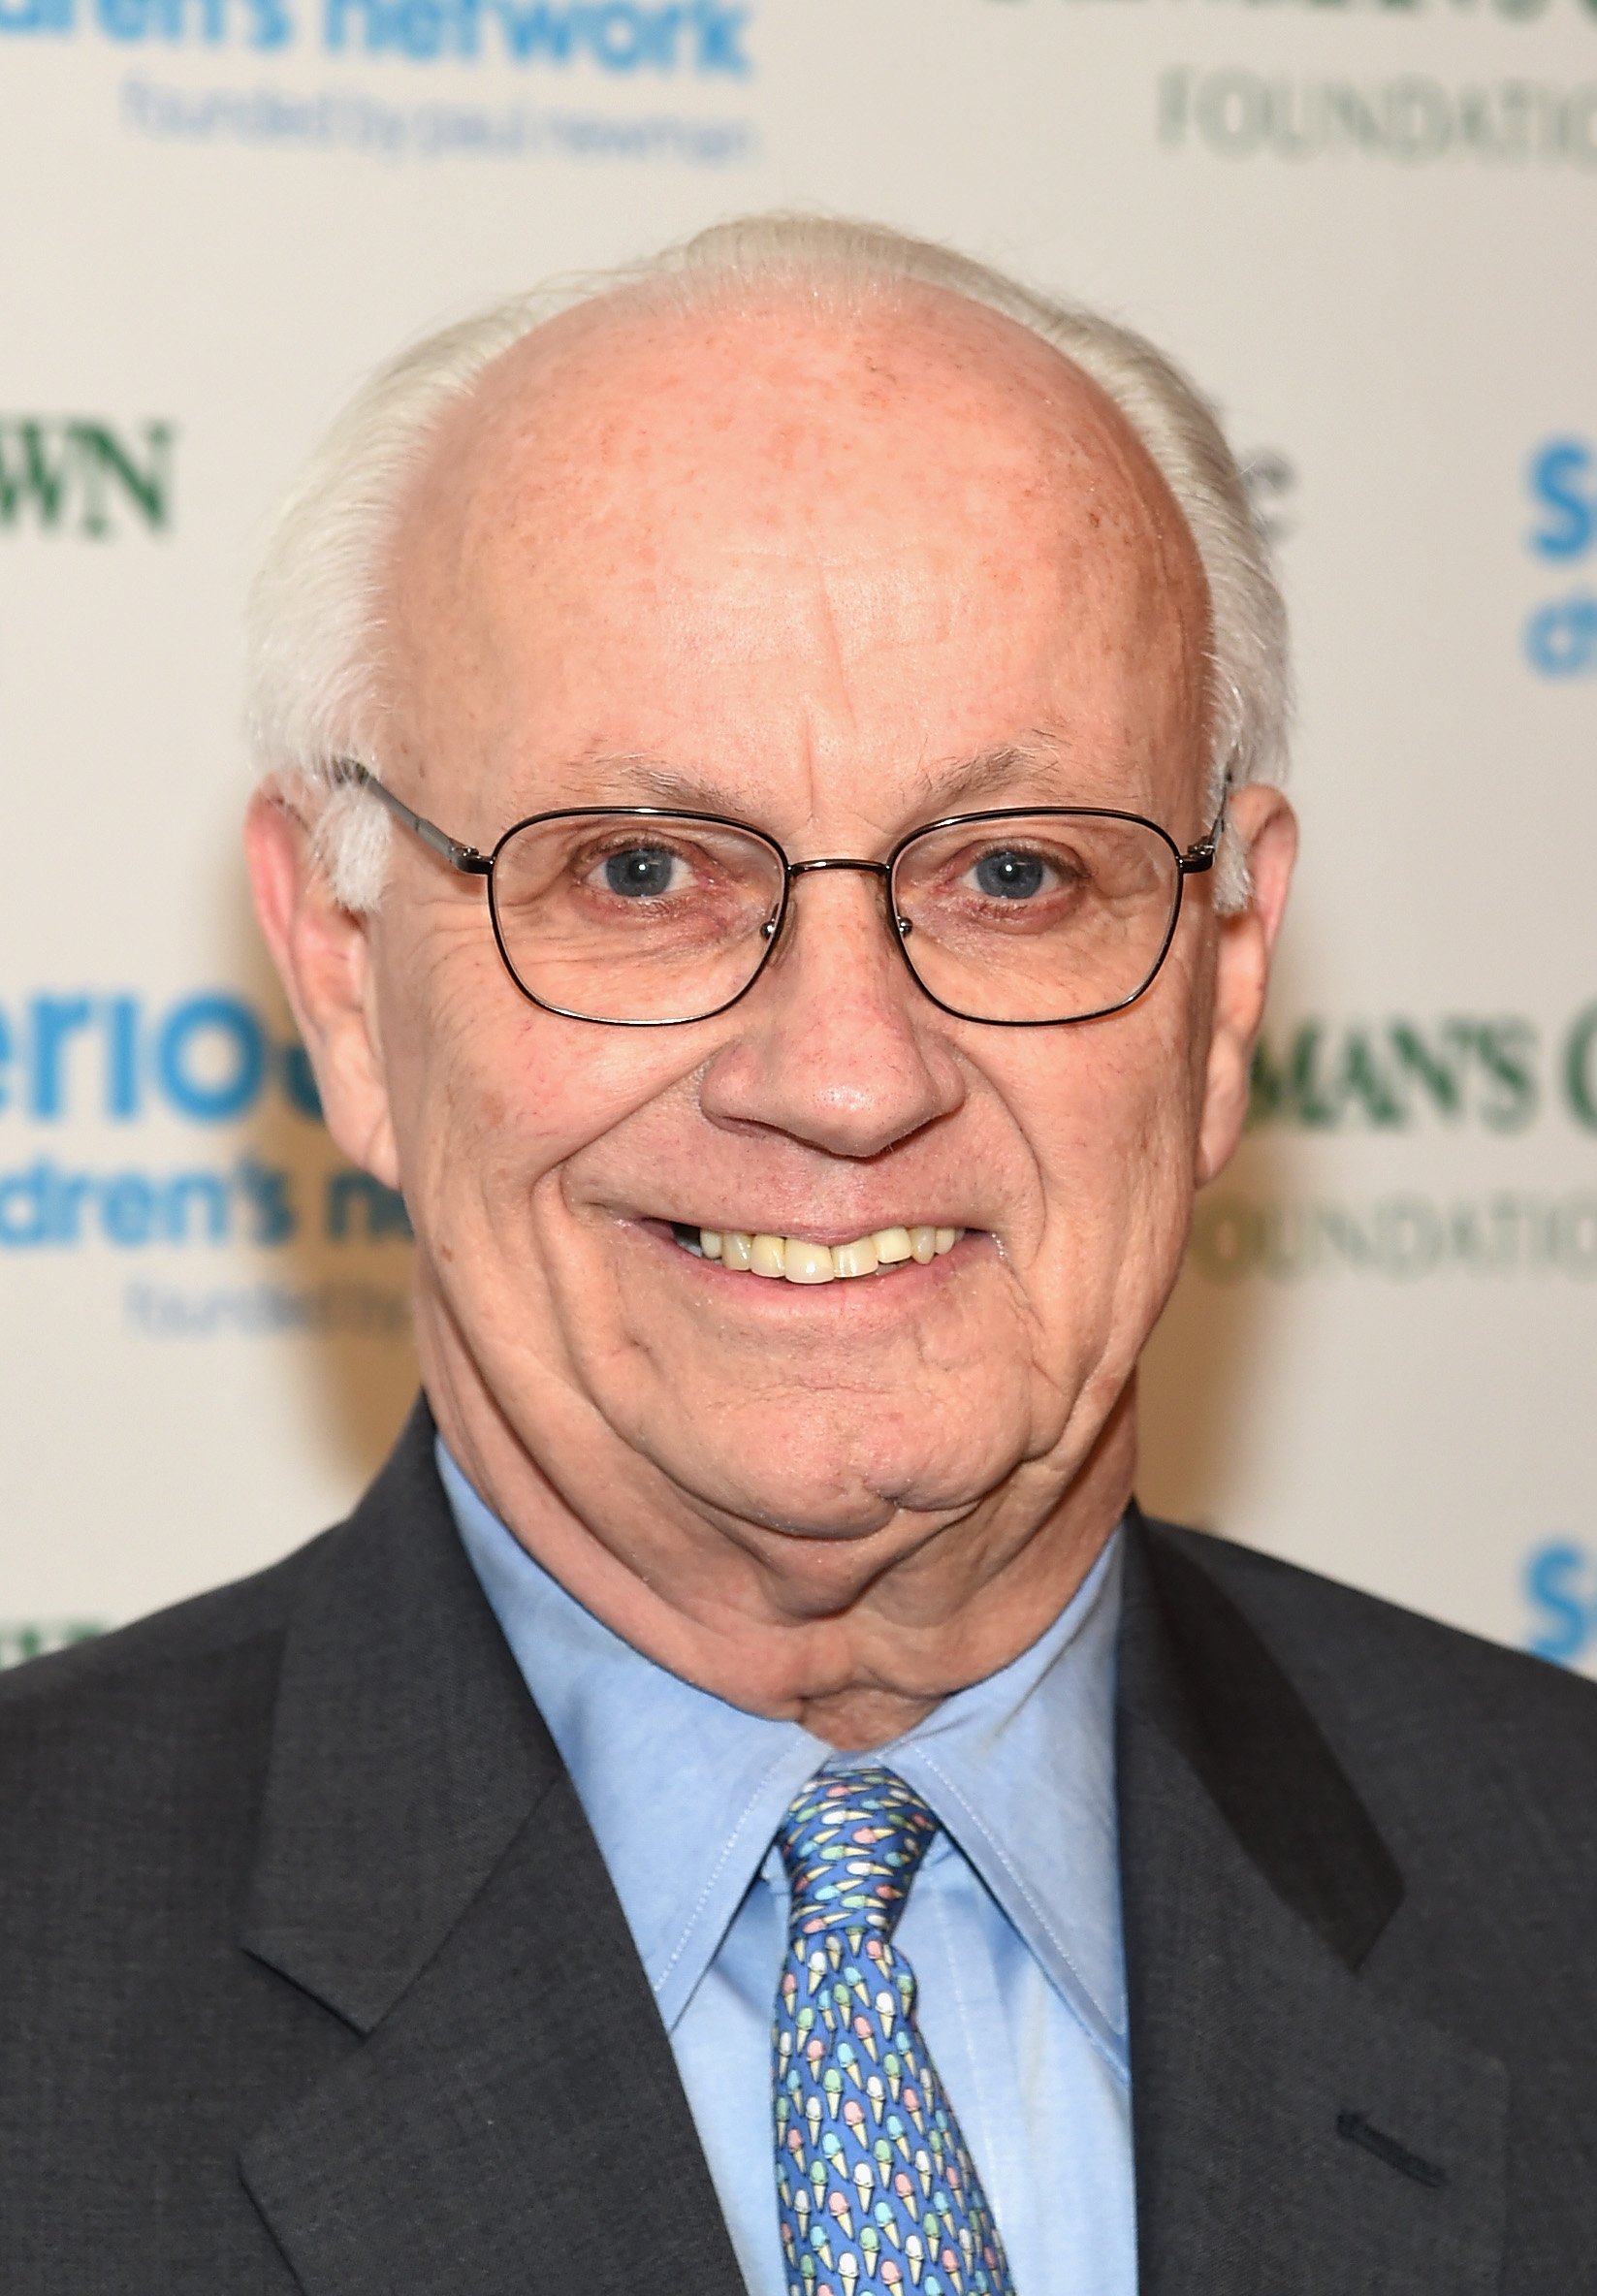 Newman's Own President and CEO Bob Forrester during SeriousFun Children's Network's New York City Gala at Avery Fisher Hall at Lincoln Center on March 2, 2015 in New York City. | Source: Getty mages